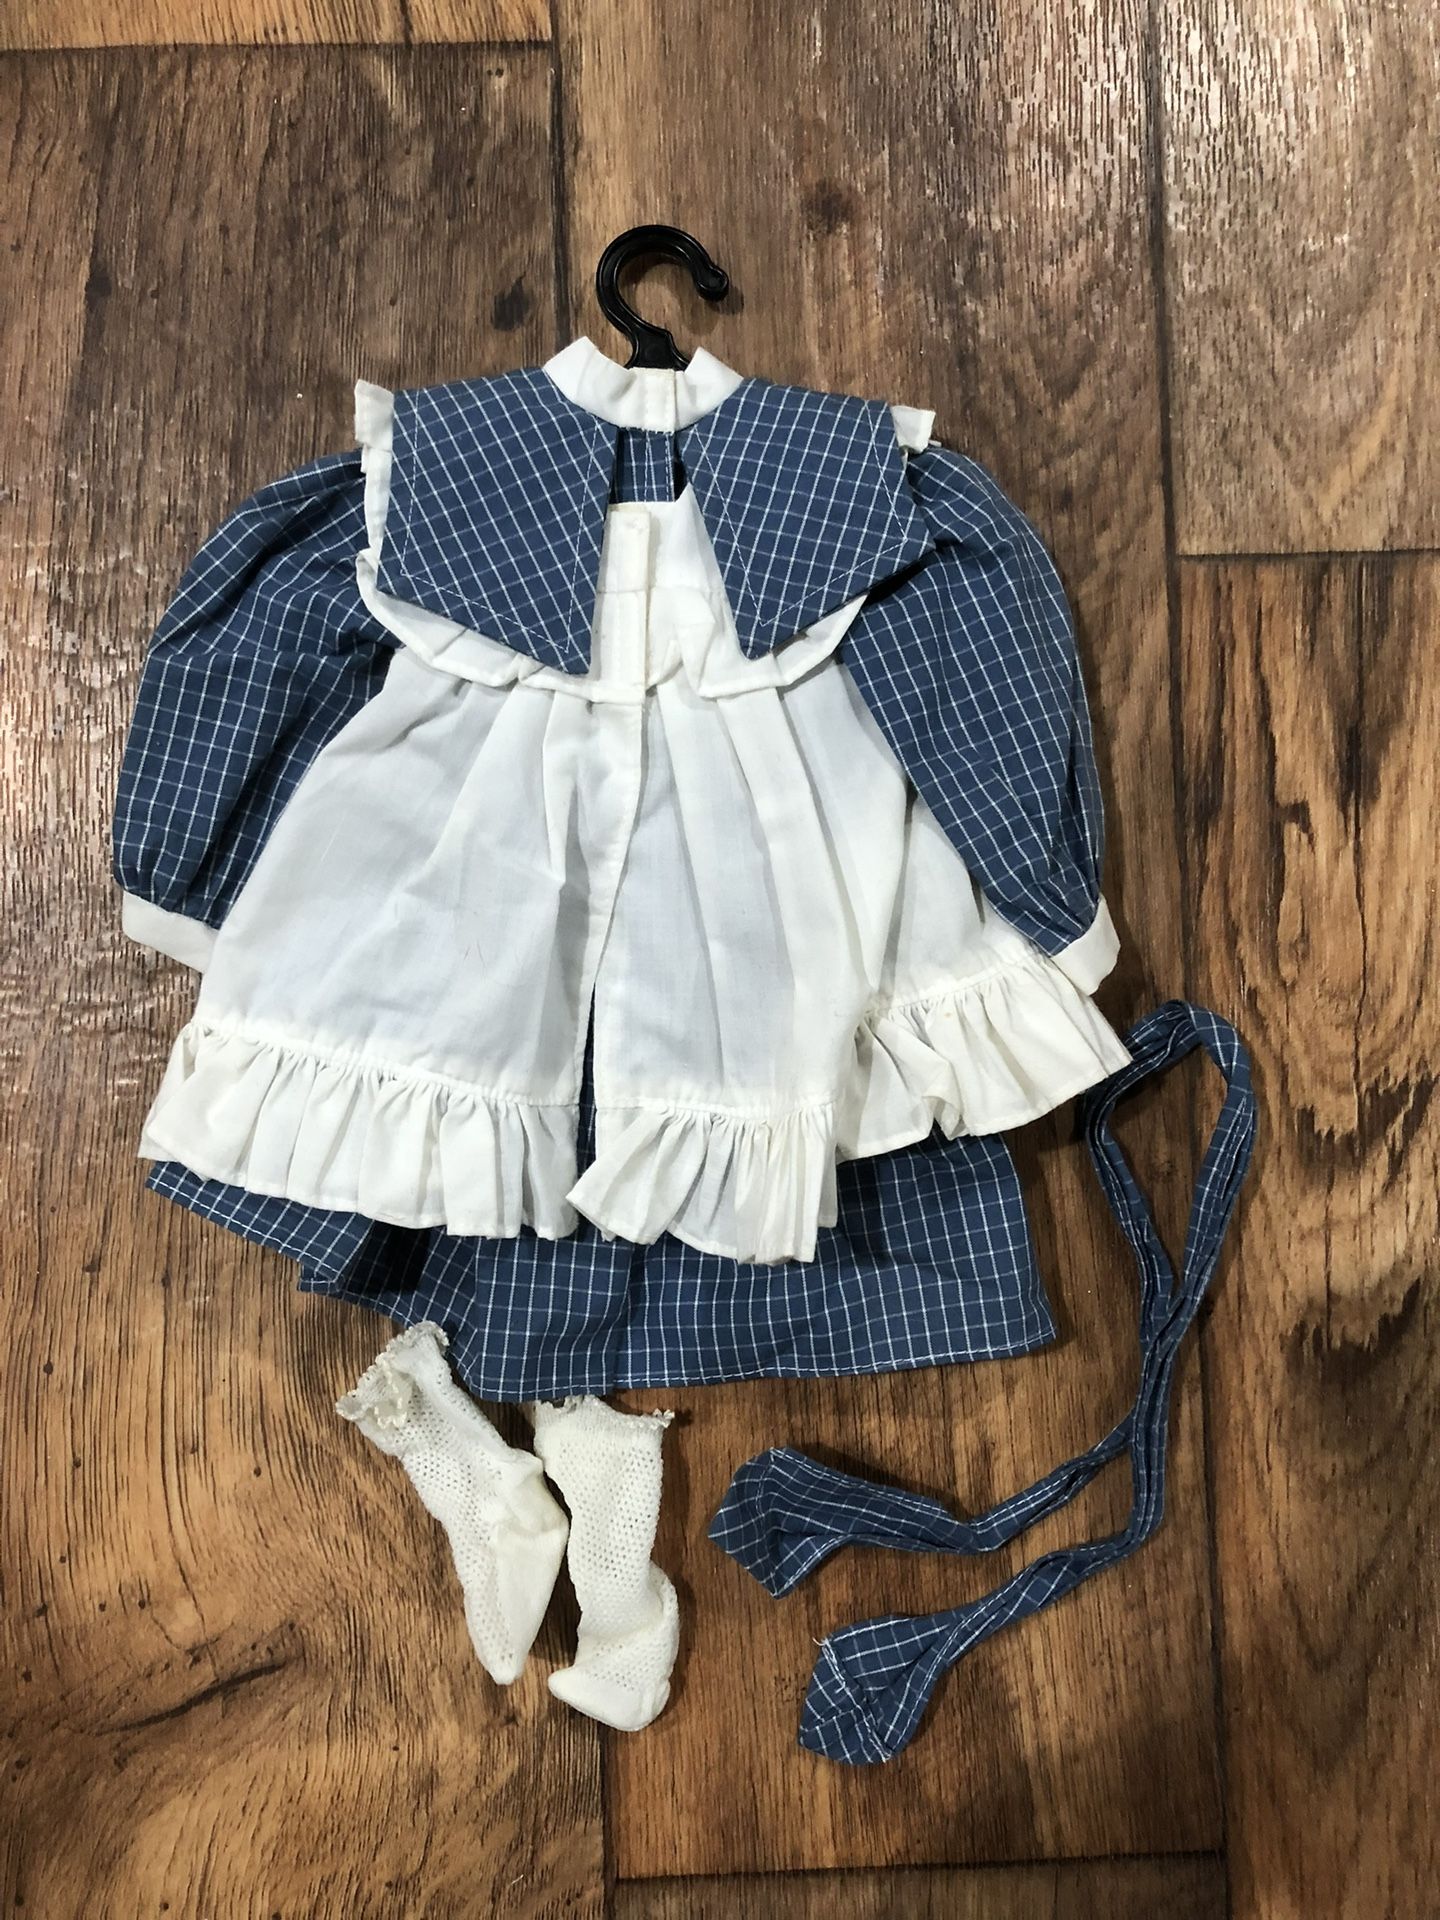 American Girl Doll Playdress And Pinafore Outfit 